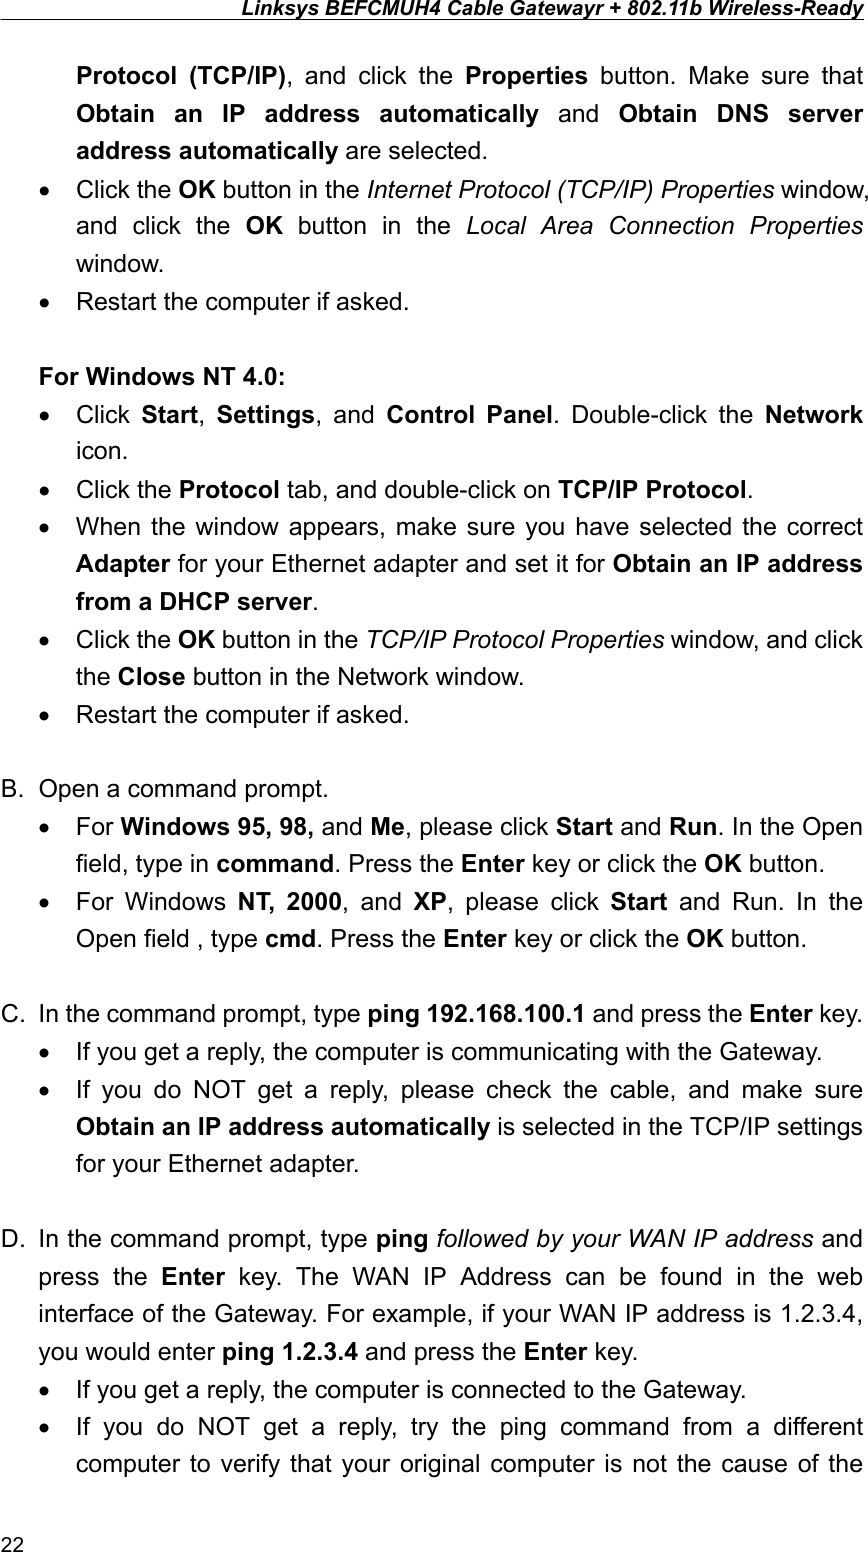 Linksys BEFCMUH4 Cable Gatewayr + 802.11b Wireless-Ready  Protocol (TCP/IP), and click the Properties button. Make sure that Obtain an IP address automatically and Obtain DNS server address automatically are selected. •  Click the OK button in the Internet Protocol (TCP/IP) Properties window, and click the OK button in the Local Area Connection Properties window. •  Restart the computer if asked.  For Windows NT 4.0: •  Click  Start,  Settings, and Control Panel. Double-click the Network icon. •  Click the Protocol tab, and double-click on TCP/IP Protocol. •  When the window appears, make sure you have selected the correct Adapter for your Ethernet adapter and set it for Obtain an IP address from a DHCP server. •  Click the OK button in the TCP/IP Protocol Properties window, and click the Close button in the Network window. •  Restart the computer if asked.  B.  Open a command prompt. •  For Windows 95, 98, and Me, please click Start and Run. In the Open field, type in command. Press the Enter key or click the OK button. •  For Windows NT, 2000, and XP, please click Start and Run. In the Open field , type cmd. Press the Enter key or click the OK button.  C.  In the command prompt, type ping 192.168.100.1 and press the Enter key. •  If you get a reply, the computer is communicating with the Gateway. •  If you do NOT get a reply, please check the cable, and make sure Obtain an IP address automatically is selected in the TCP/IP settings for your Ethernet adapter.  D.  In the command prompt, type ping followed by your WAN IP address and press the Enter key. The WAN IP Address can be found in the web interface of the Gateway. For example, if your WAN IP address is 1.2.3.4, you would enter ping 1.2.3.4 and press the Enter key. •  If you get a reply, the computer is connected to the Gateway. •  If you do NOT get a reply, try the ping command from a different computer to verify that your original computer is not the cause of the 22 